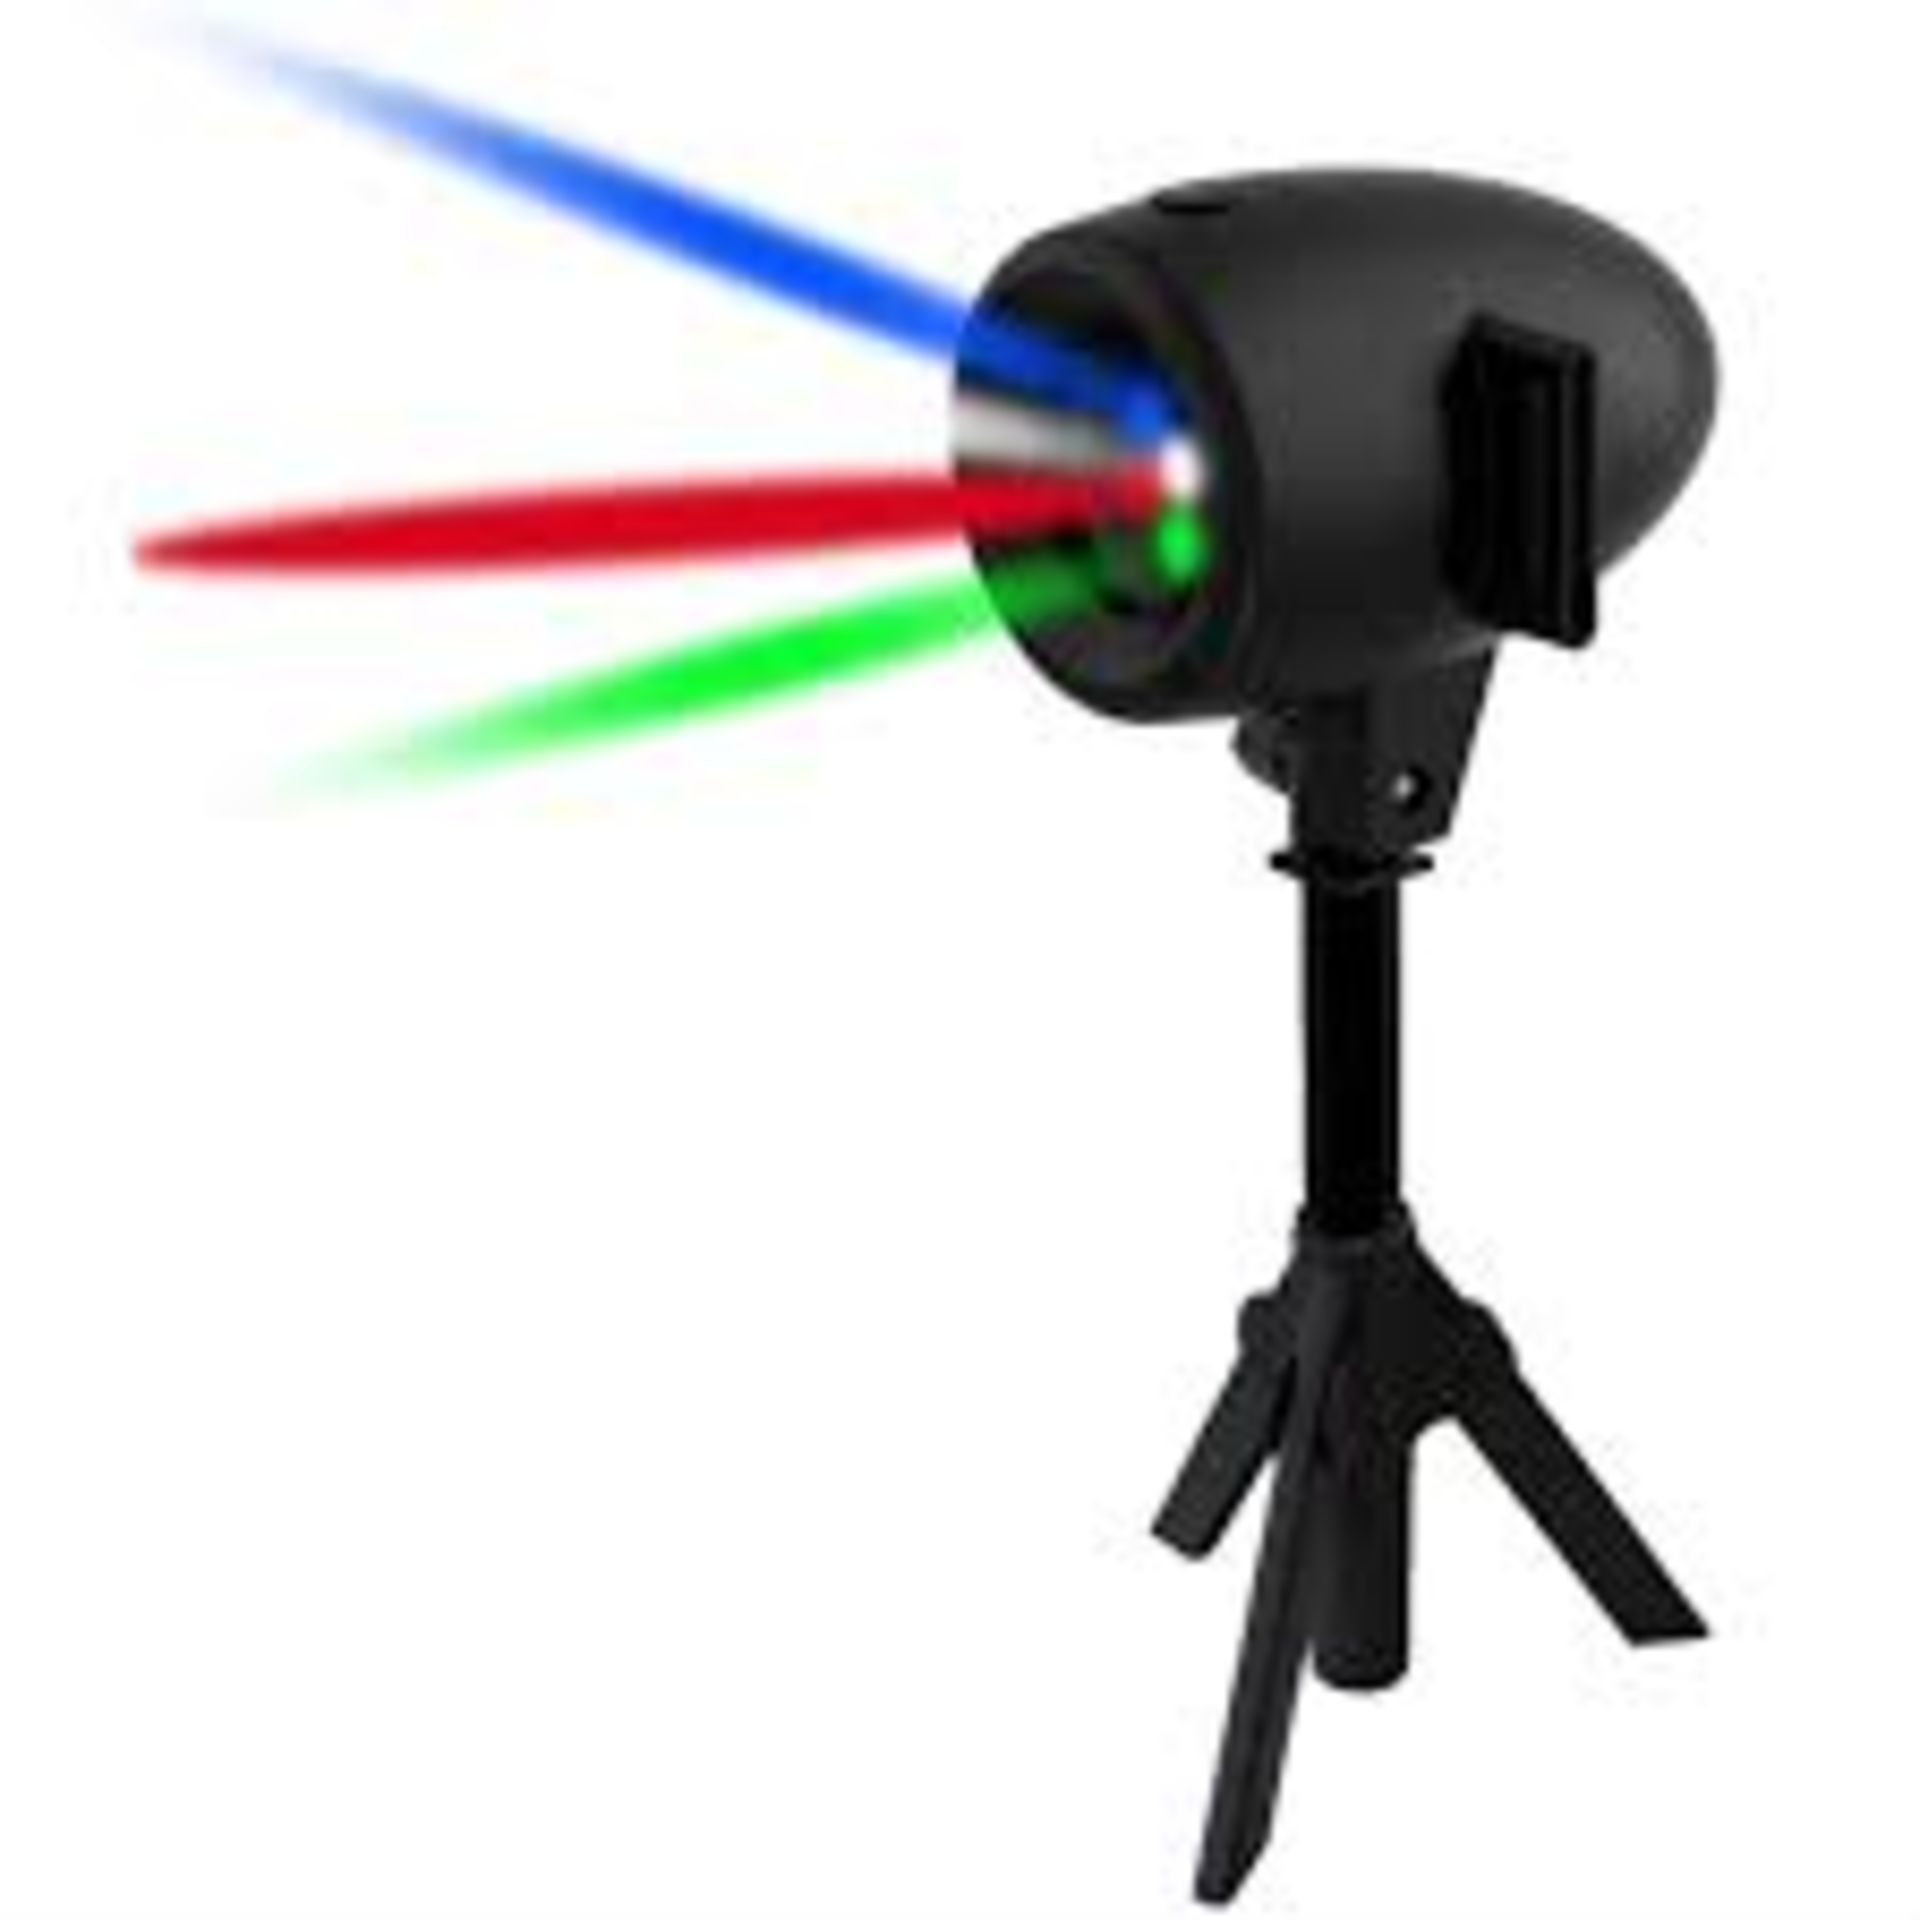 1 x StarTastic Motion Laser Projector - Starry Light Display Suitable For Christmas, Weddings, - Image 3 of 4